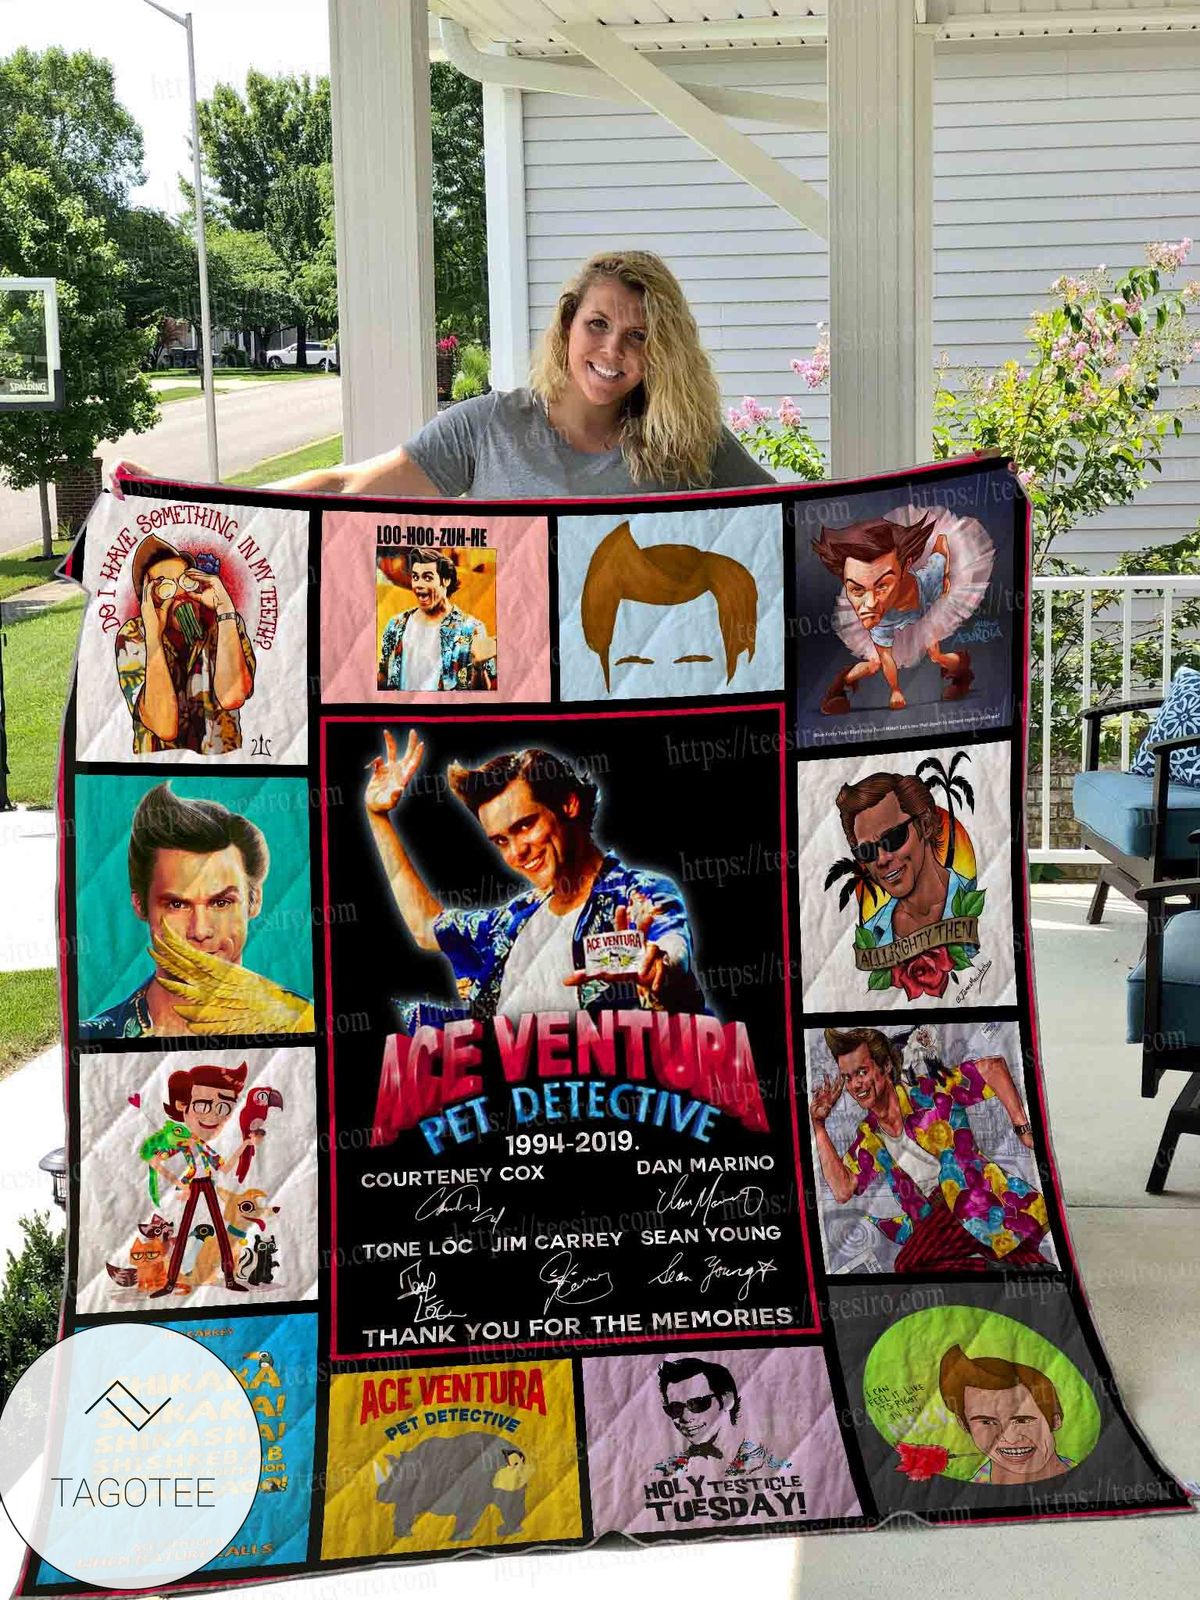 Ace Ventura Pet Detective 1994-2019 Thank You For The Memories Signatures Quilt Blanket